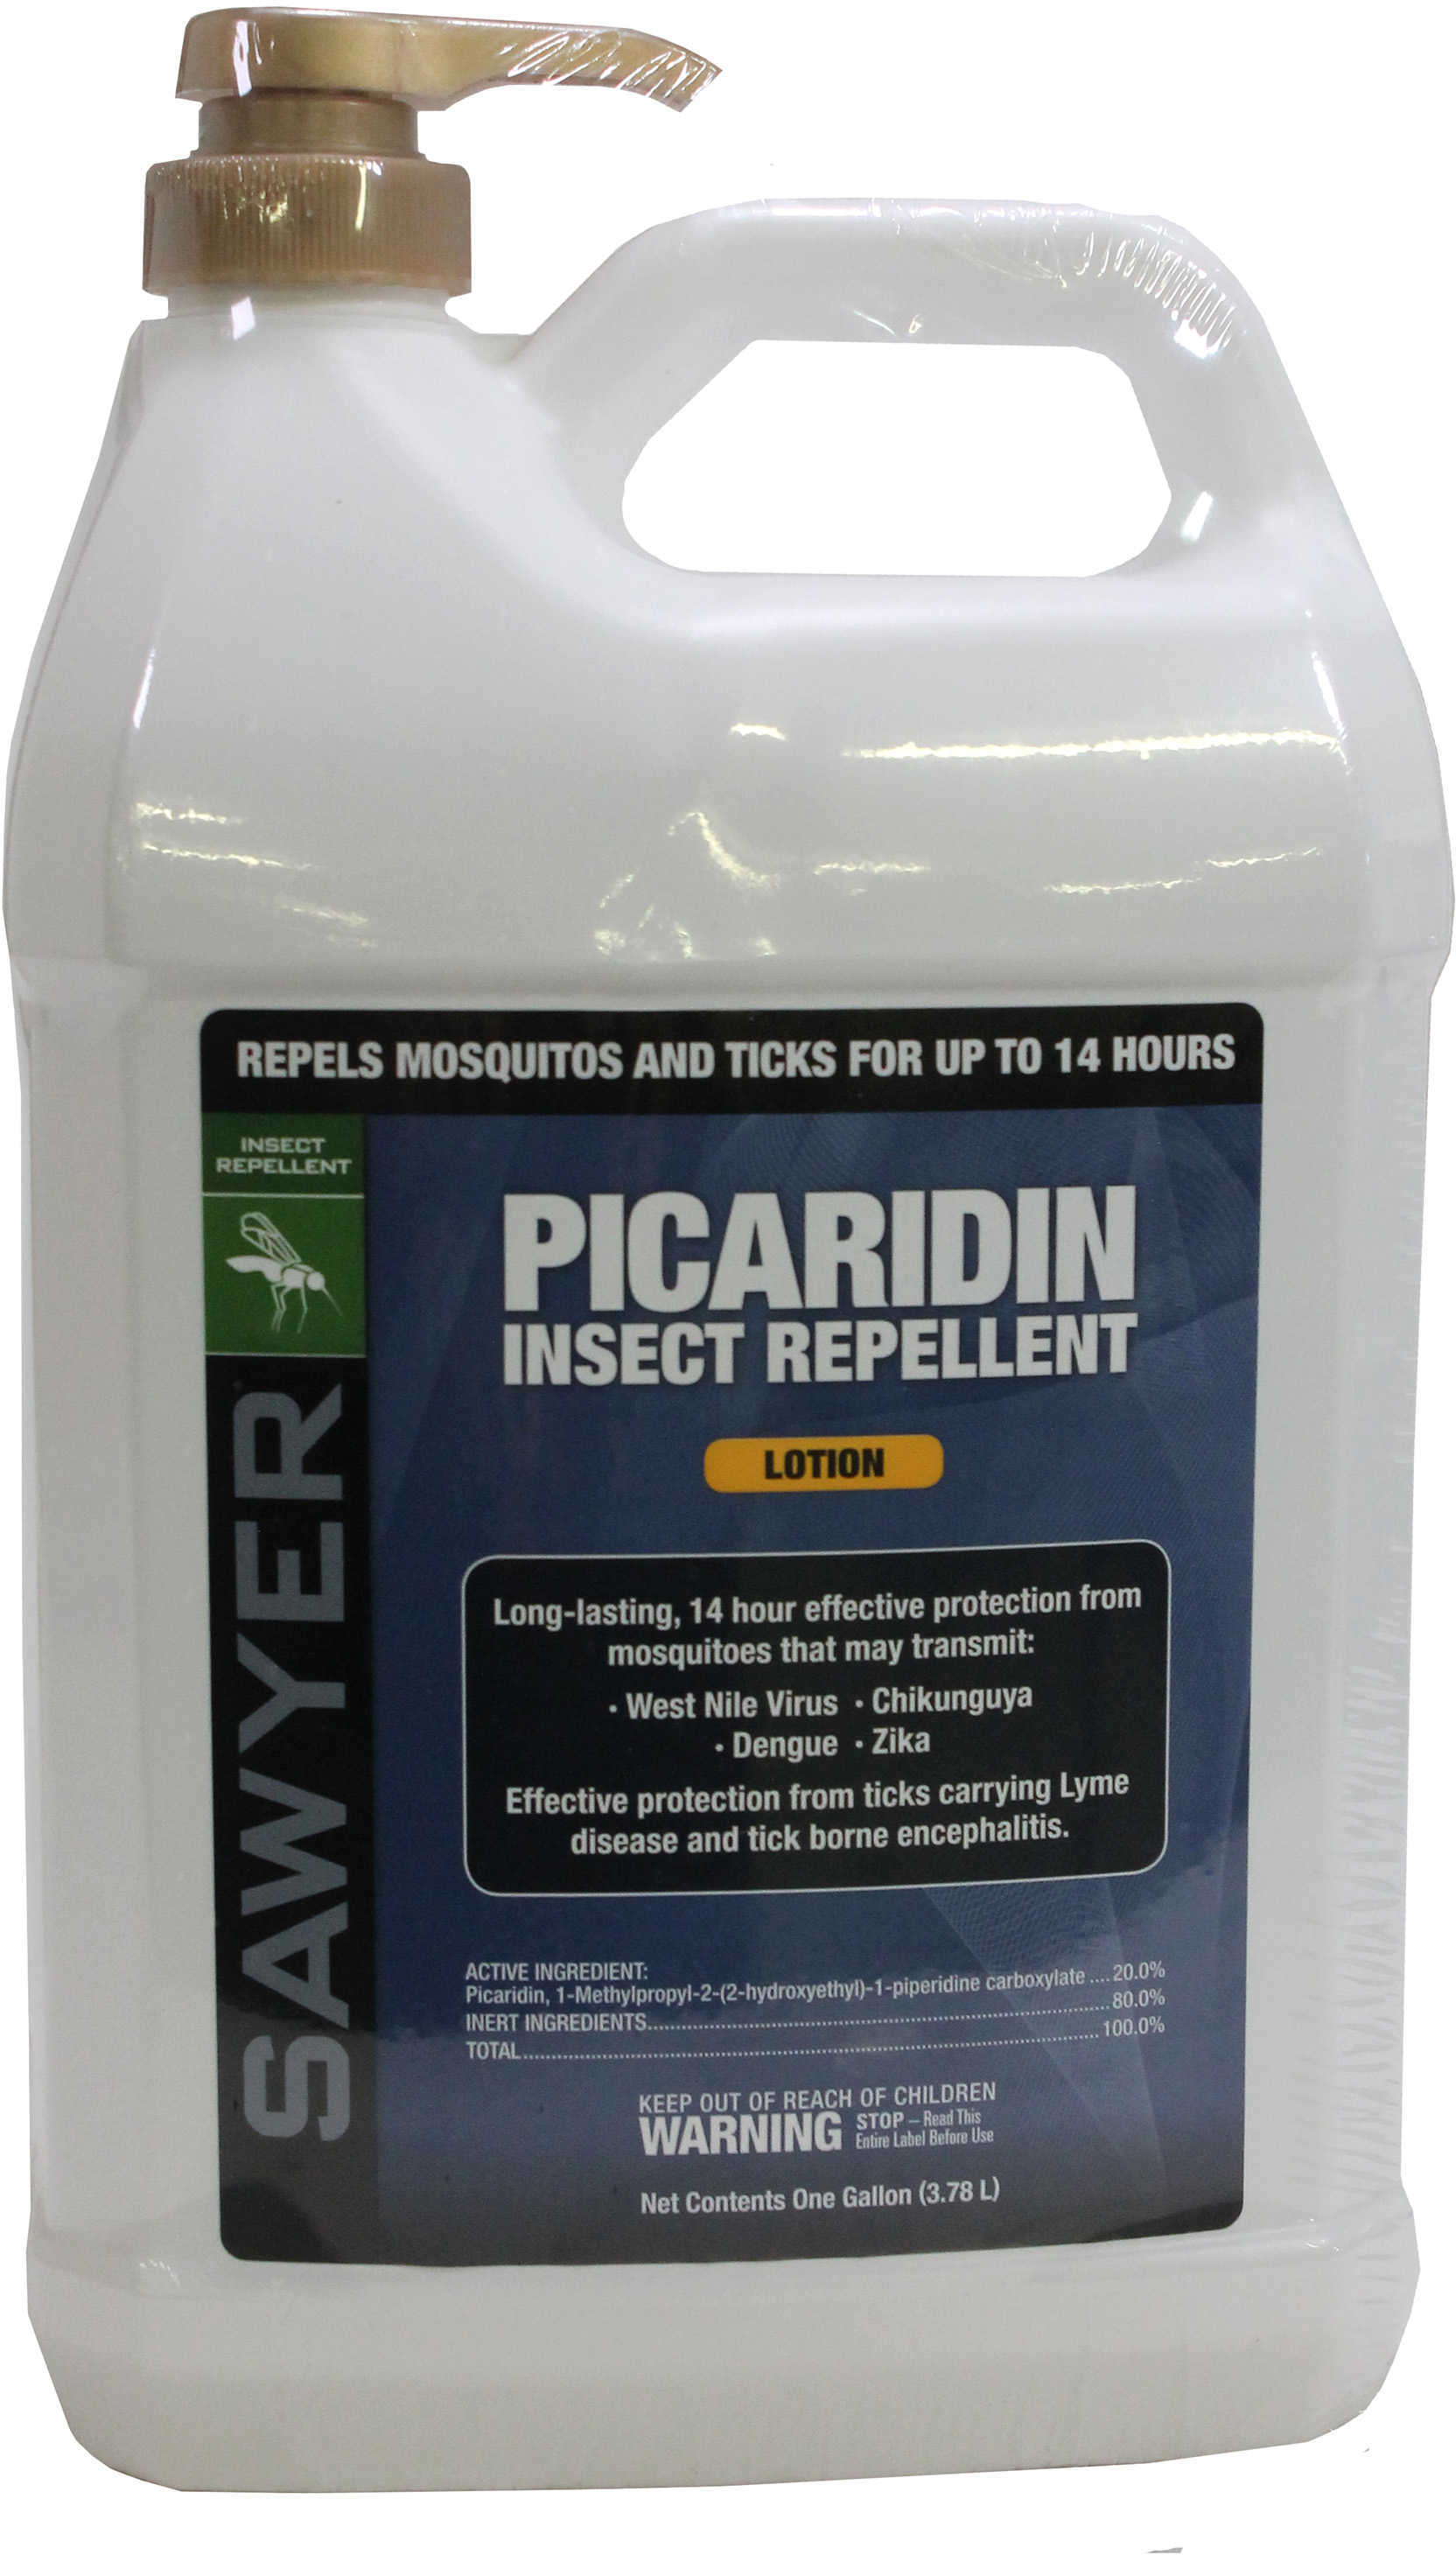 Sawyer Products 20% Picaridin Lotion 128 oz Md: SP569